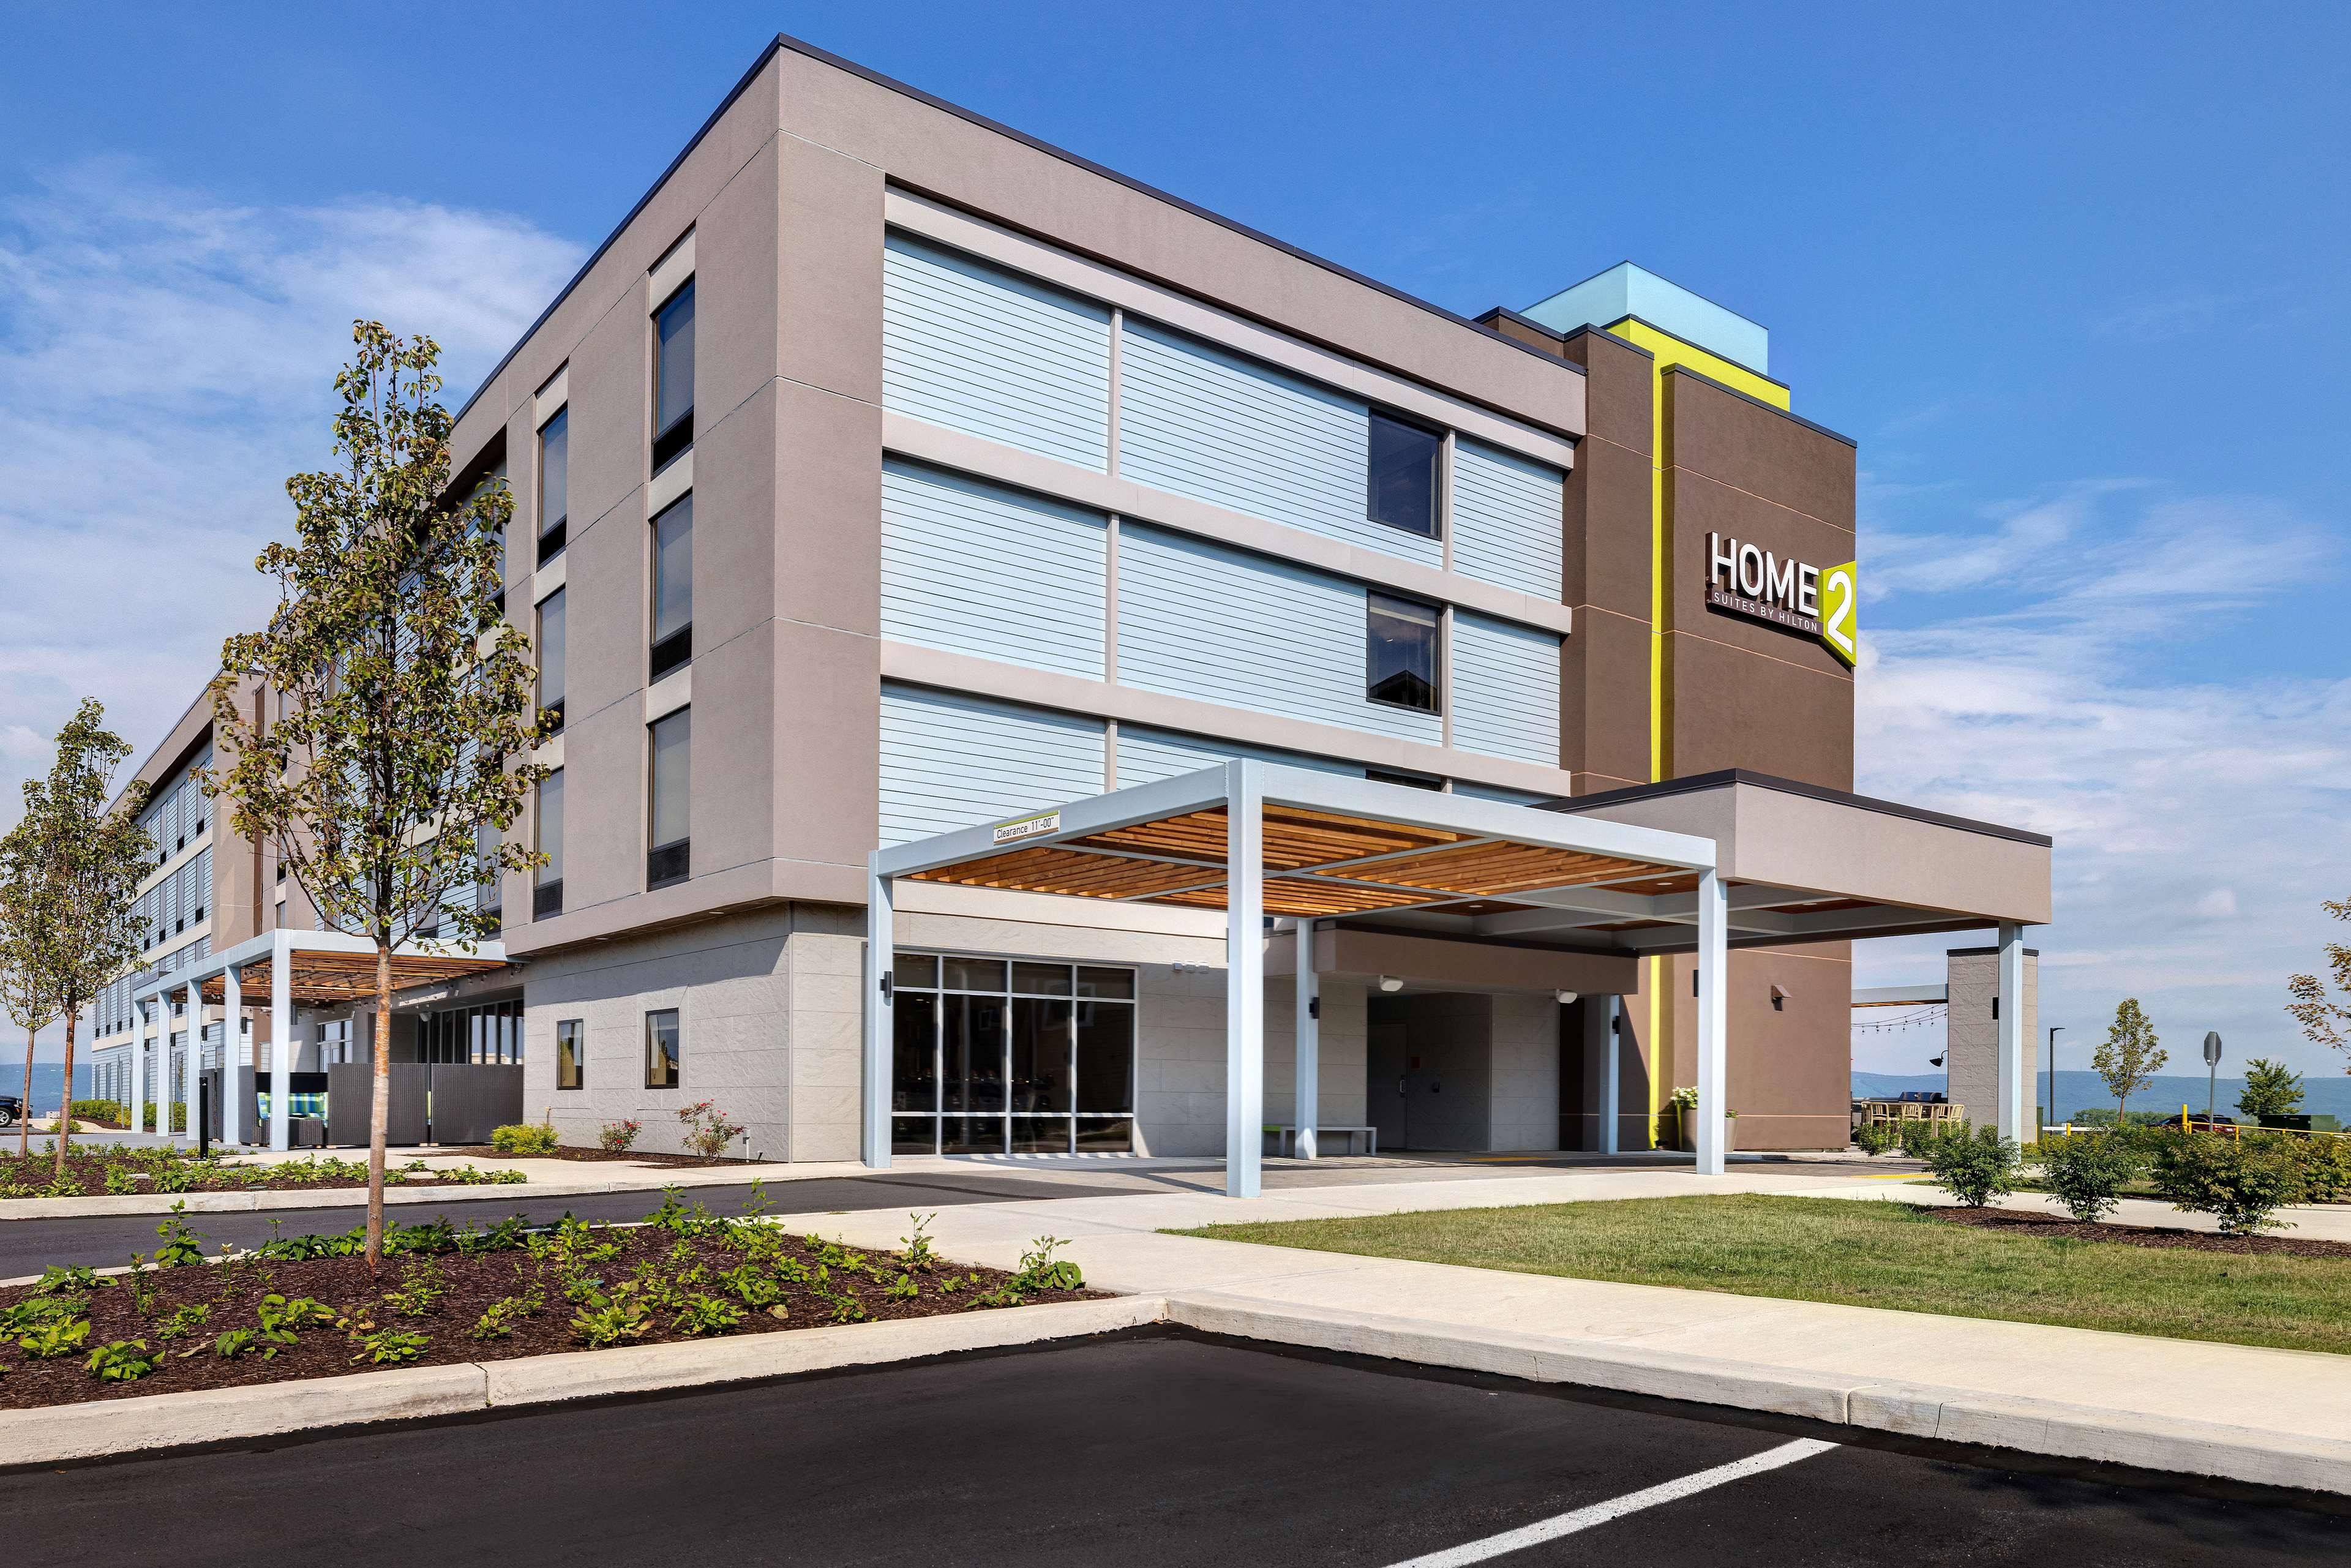 Home2 Suites by Hilton Wilkes-Barre image